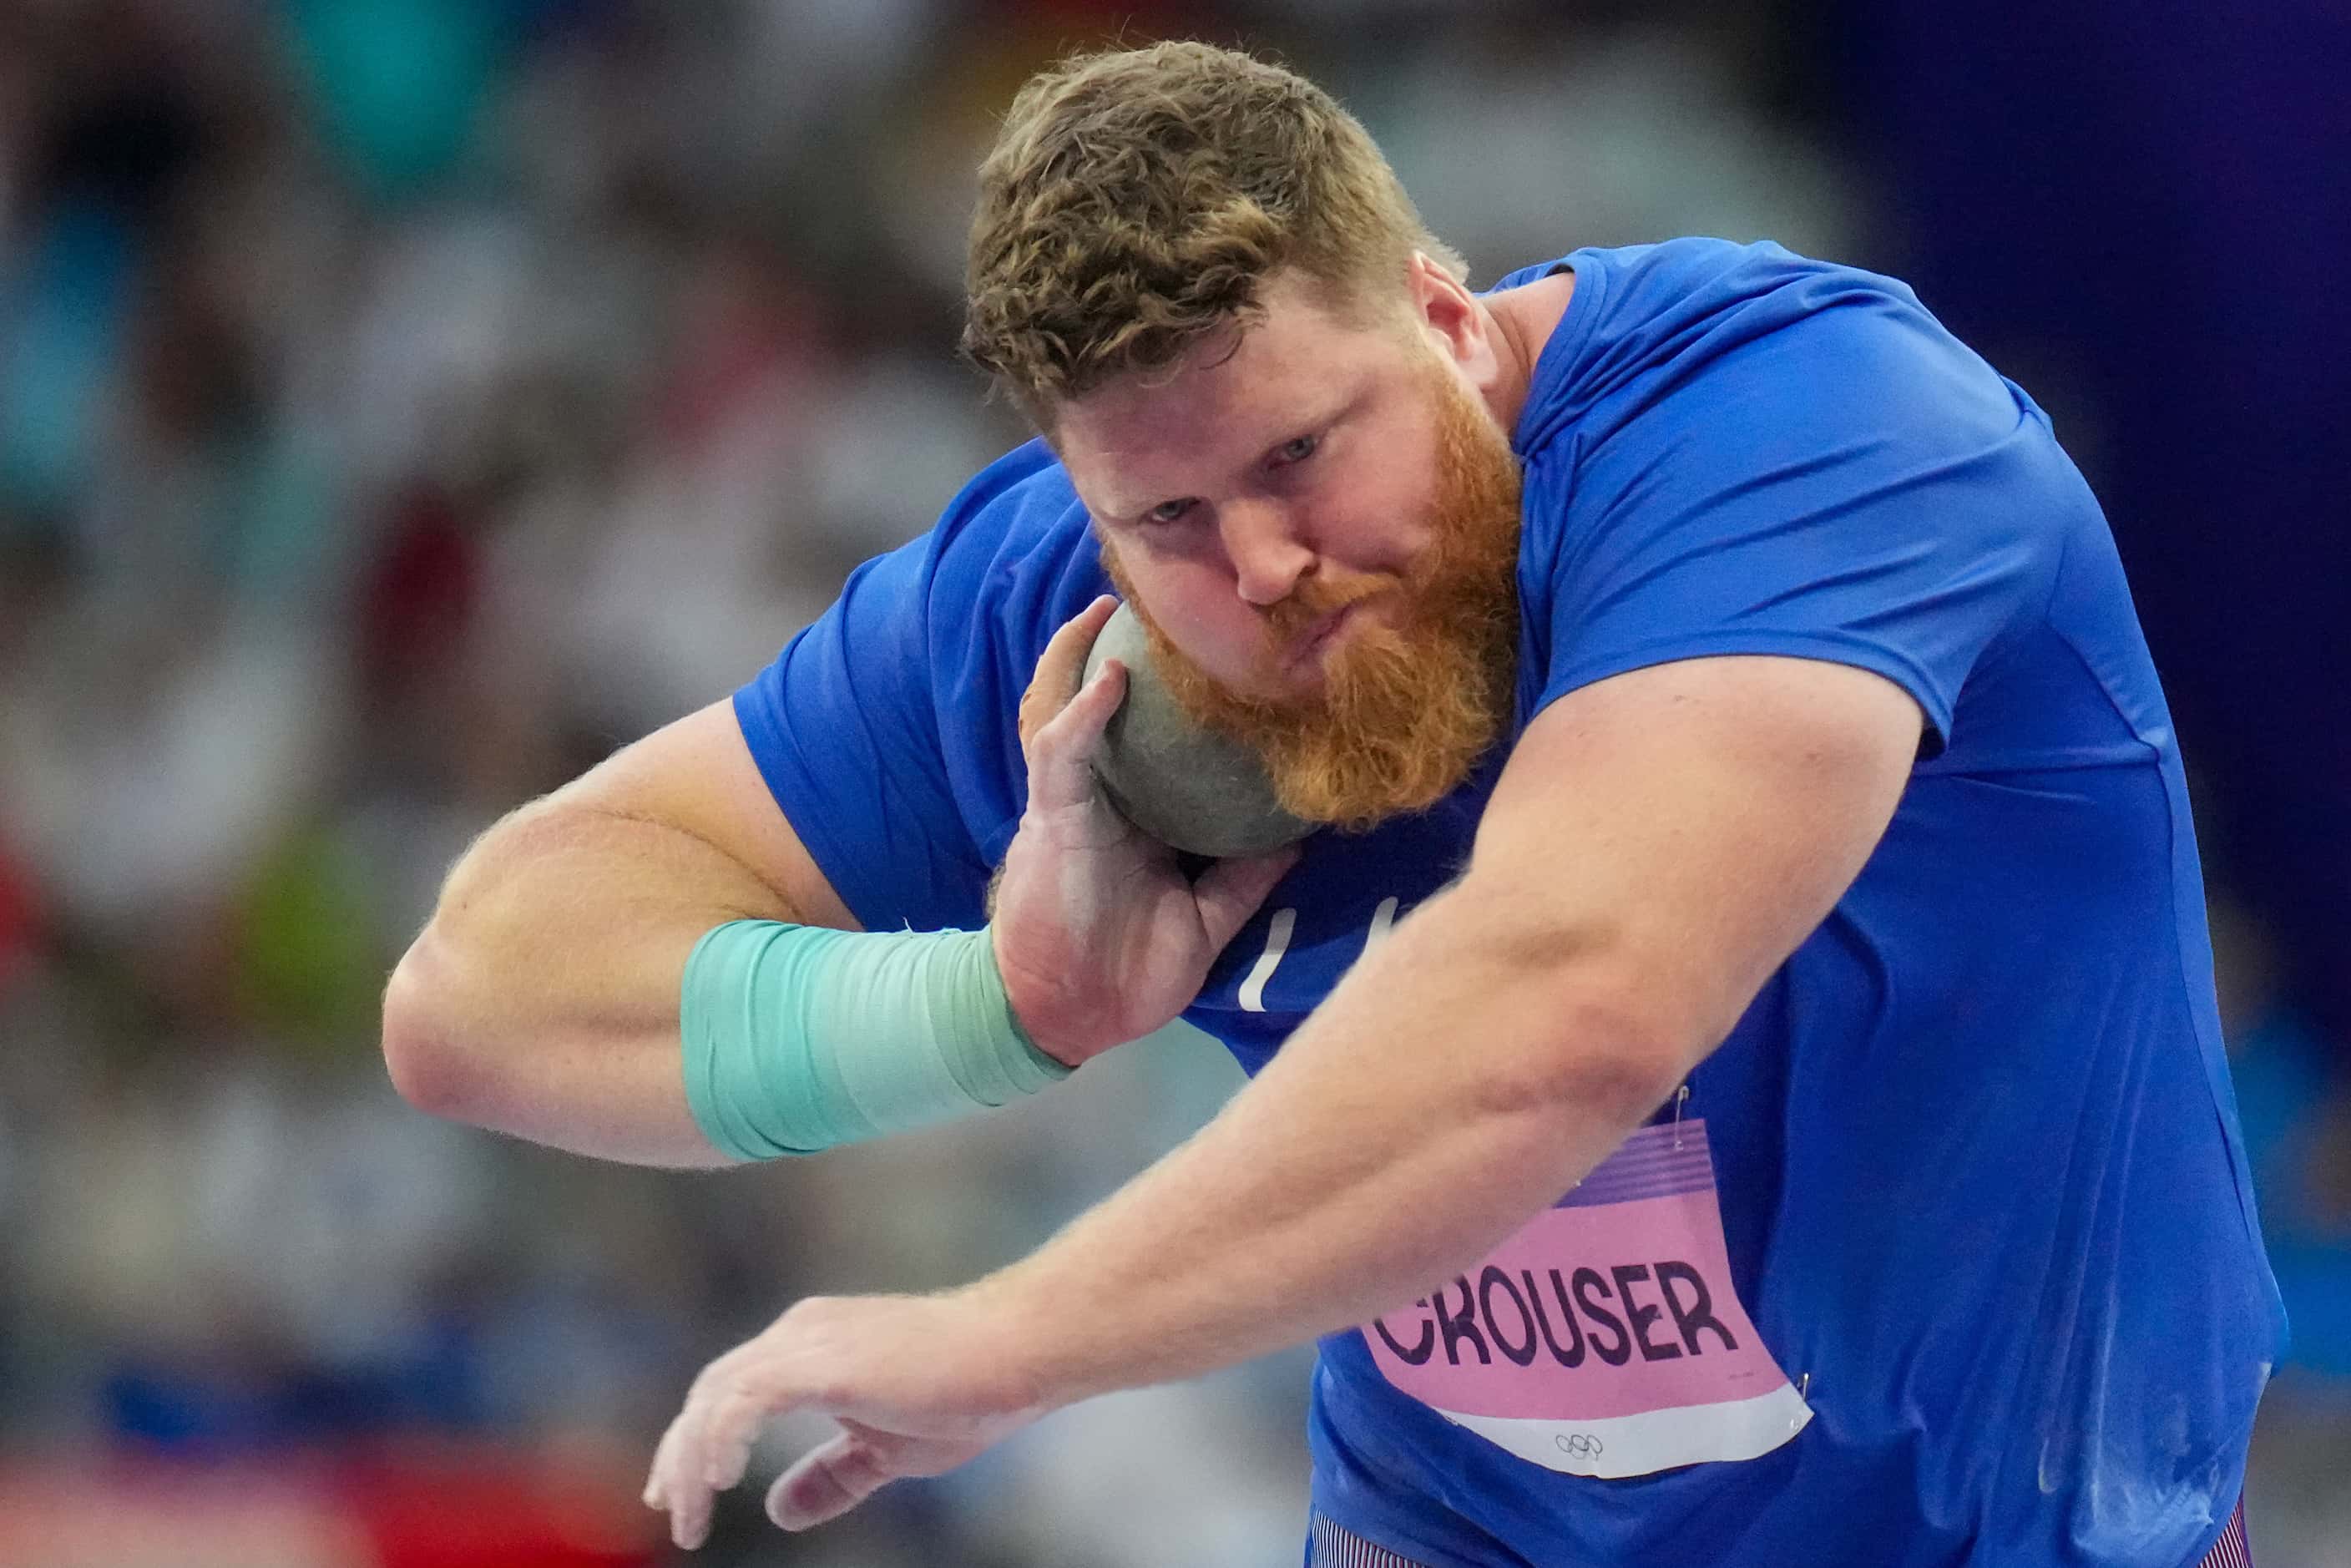 Ryan Crouser competes in shot put qualifying at the 2024 Summer Olympics on Friday, Aug. 2,...